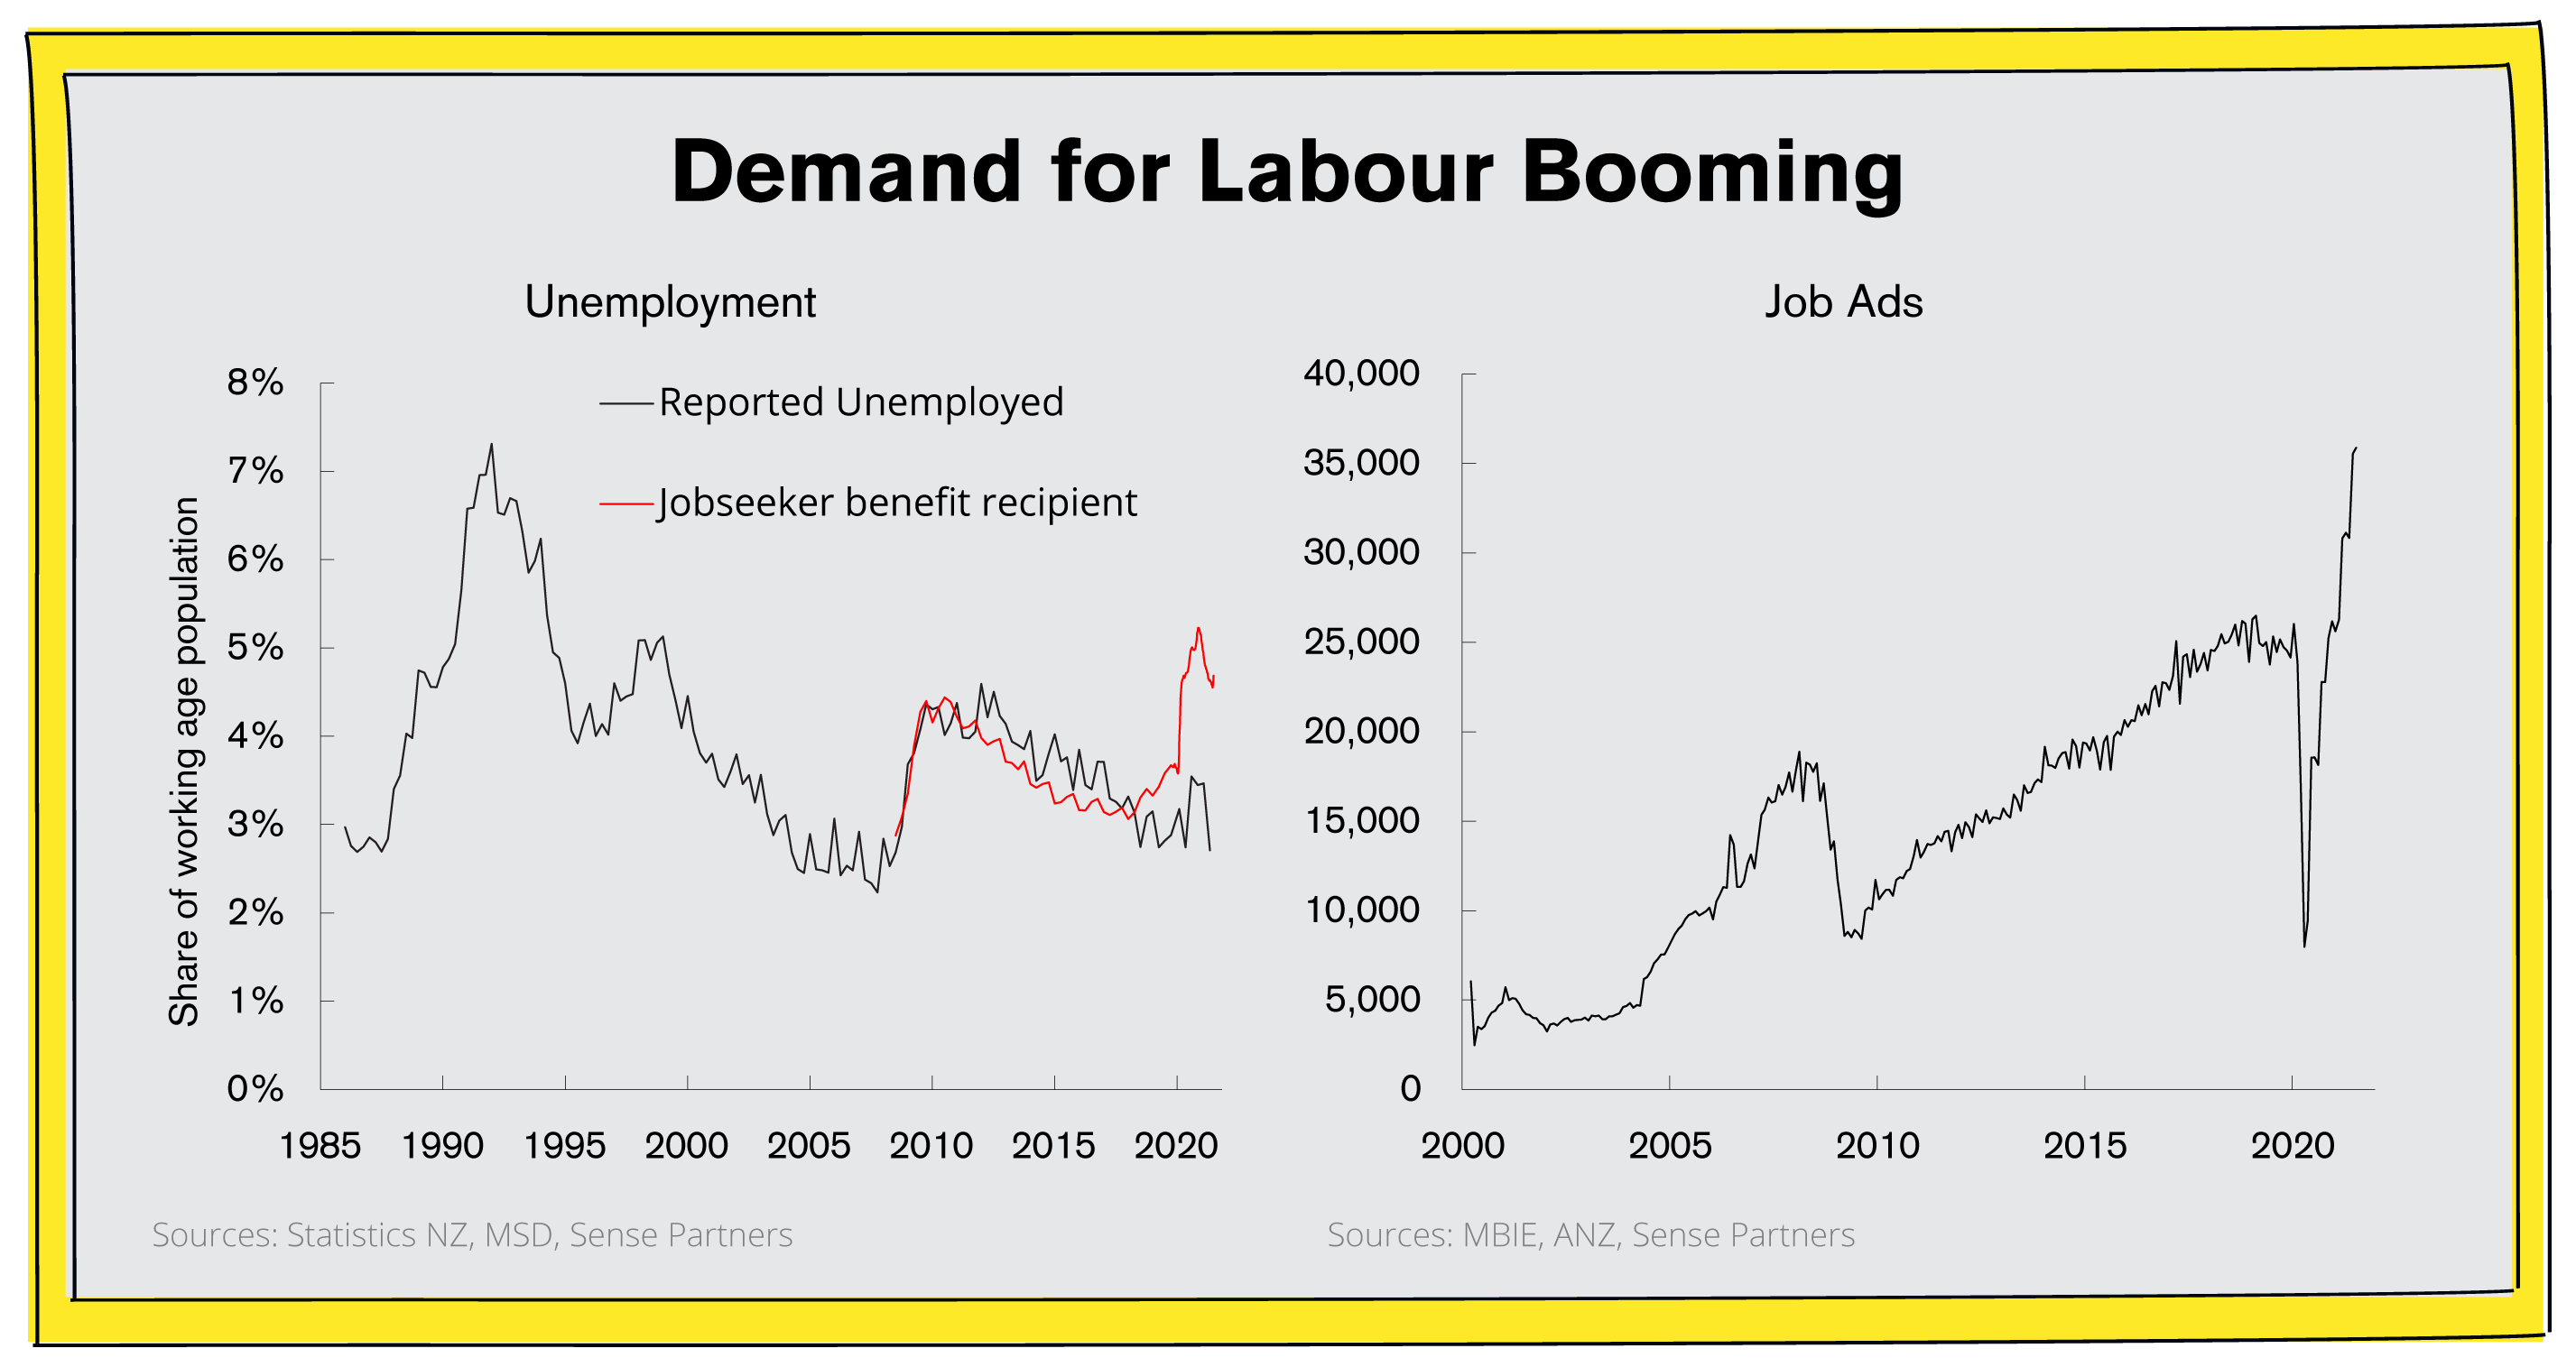 Demand for Labour Booming